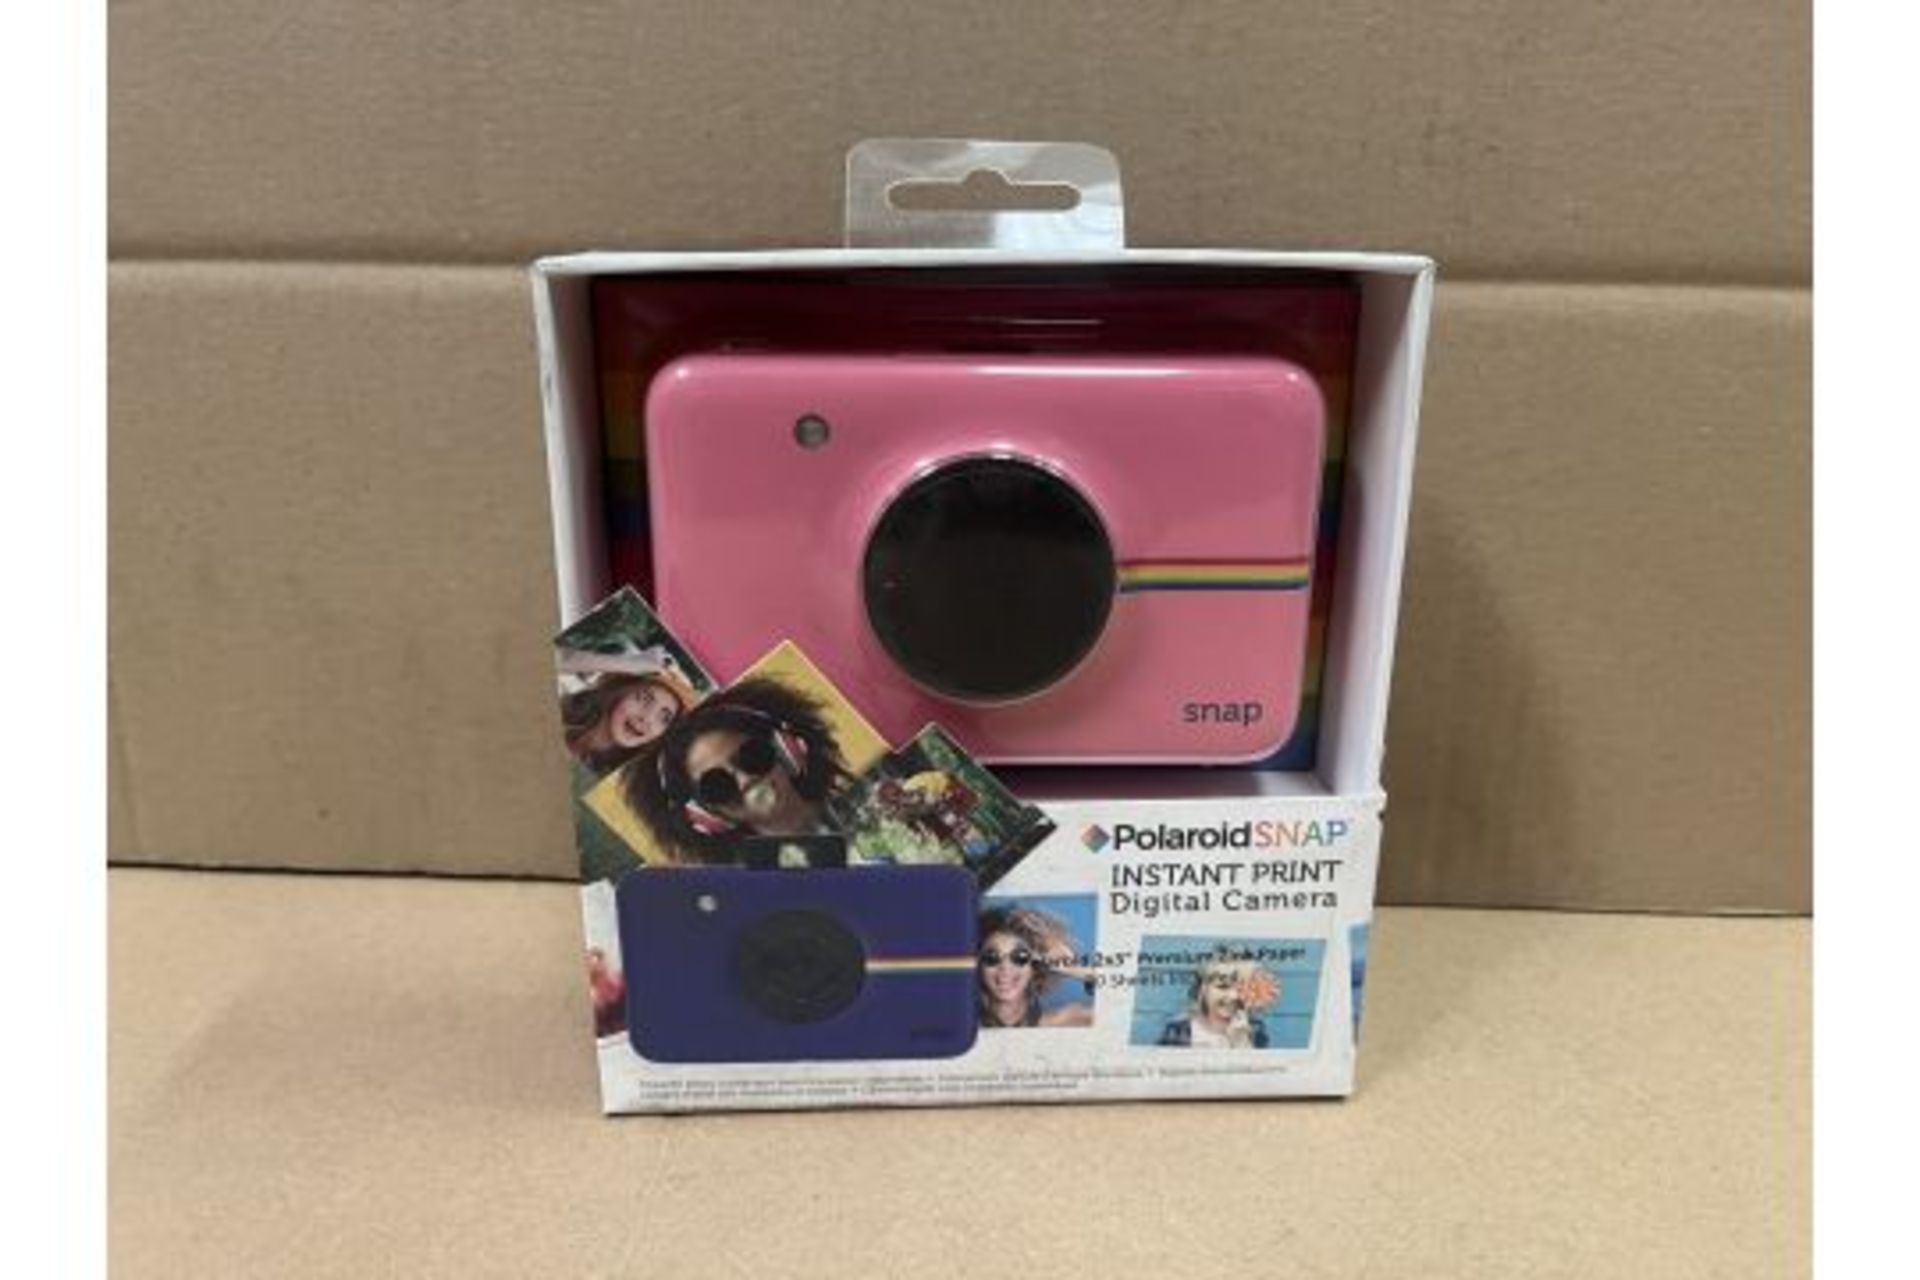 BRAND NEW POLAROID SNAP INSTANT PRINT DIGITAL CAMERA WITH 20 SHEETS INCLUDED RRP £500 S1-24